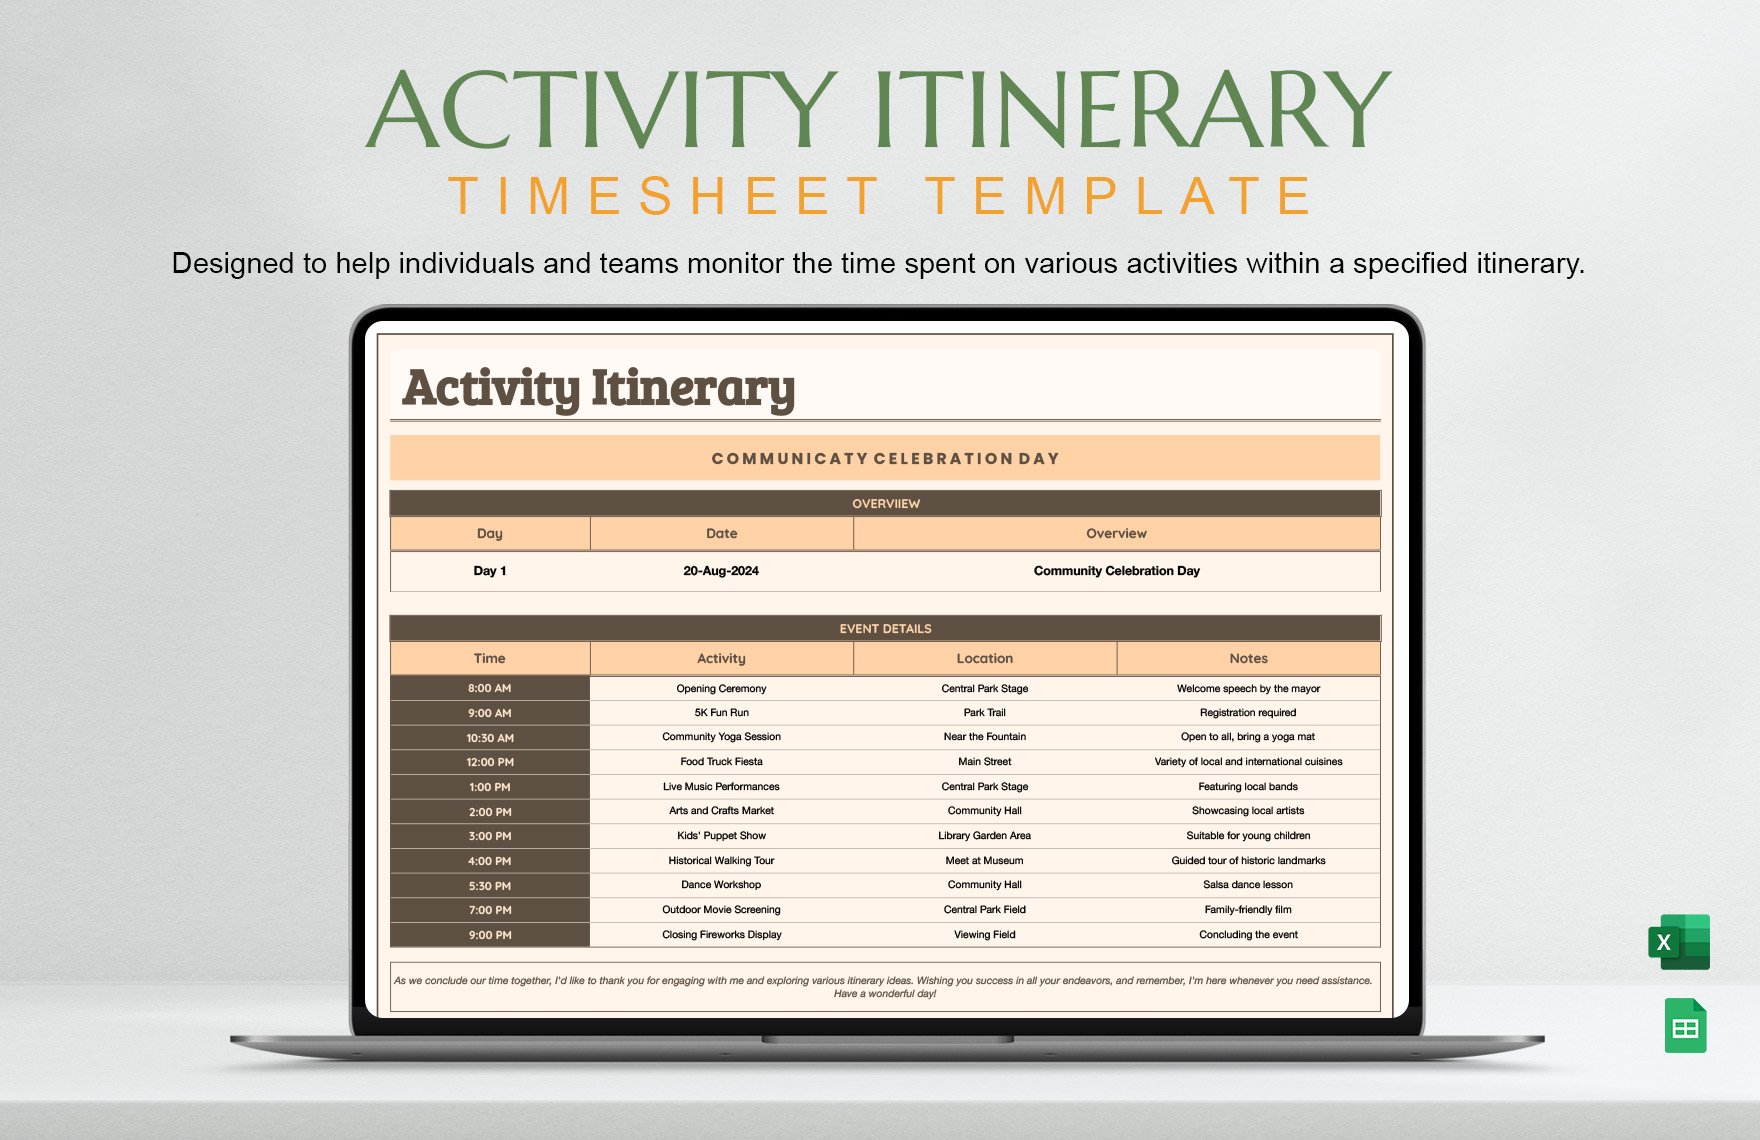 Free Activity Itinerary Template in Excel, Google Sheets